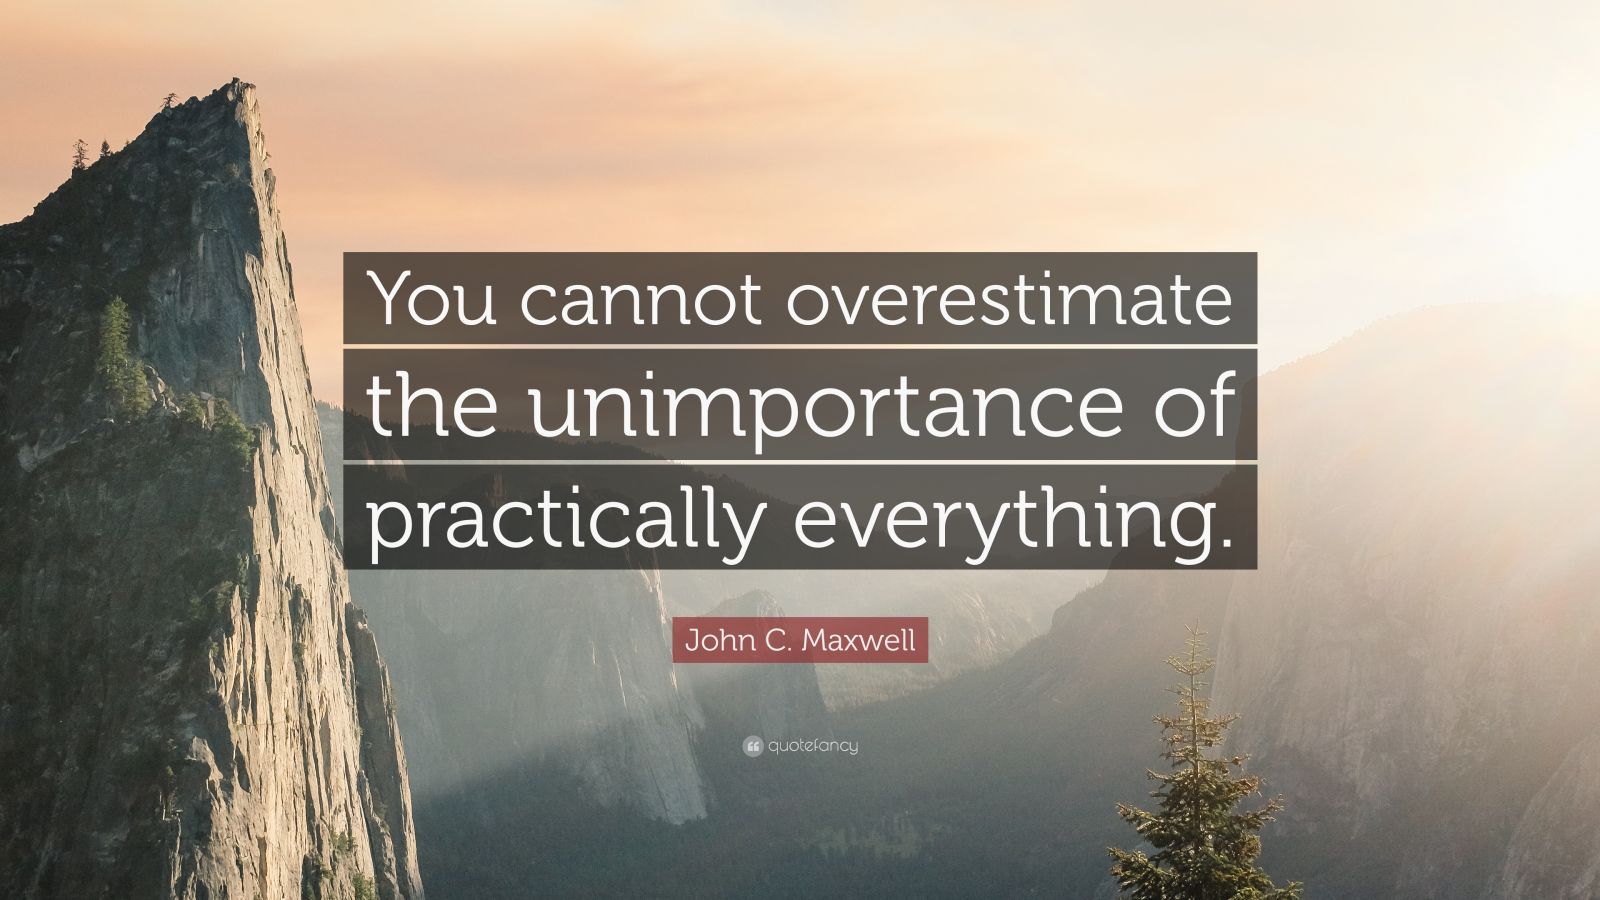 John C. Maxwell Quote “You cannot overestimate the unimportance of